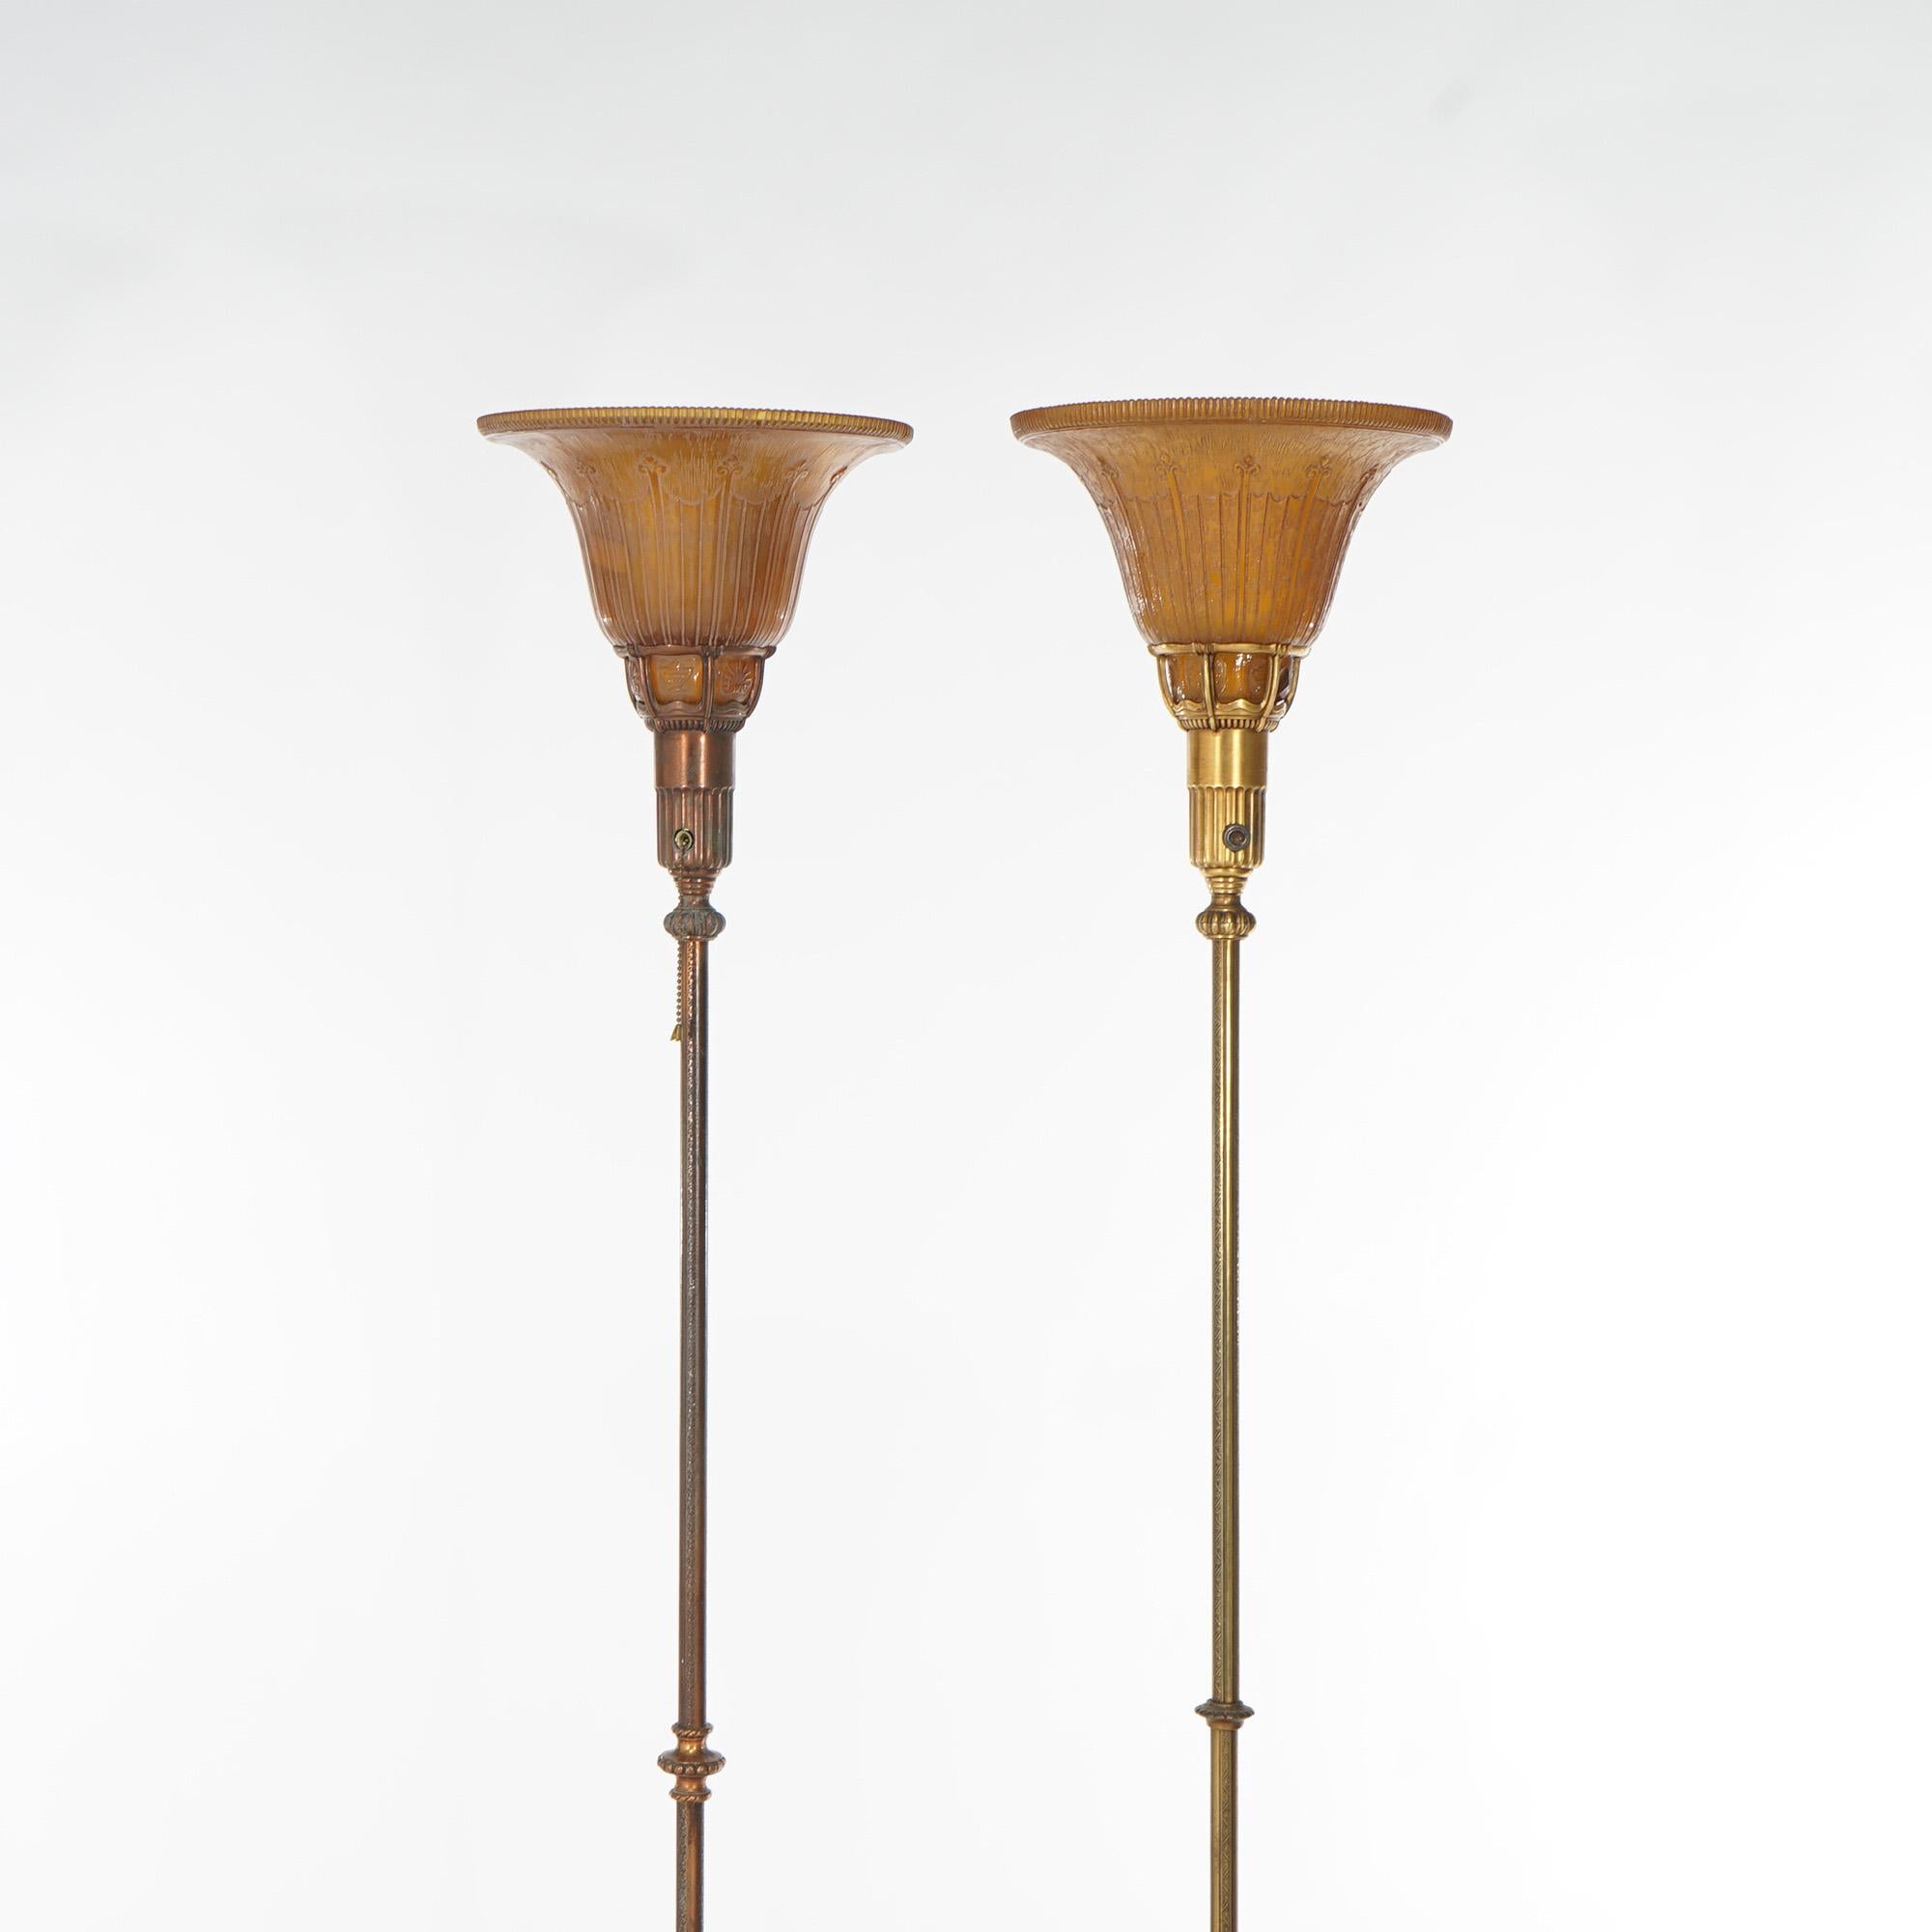 Cast Two Classical Torchiere Gilt Metal & Amber Glass Floor Lamps by Lightolier